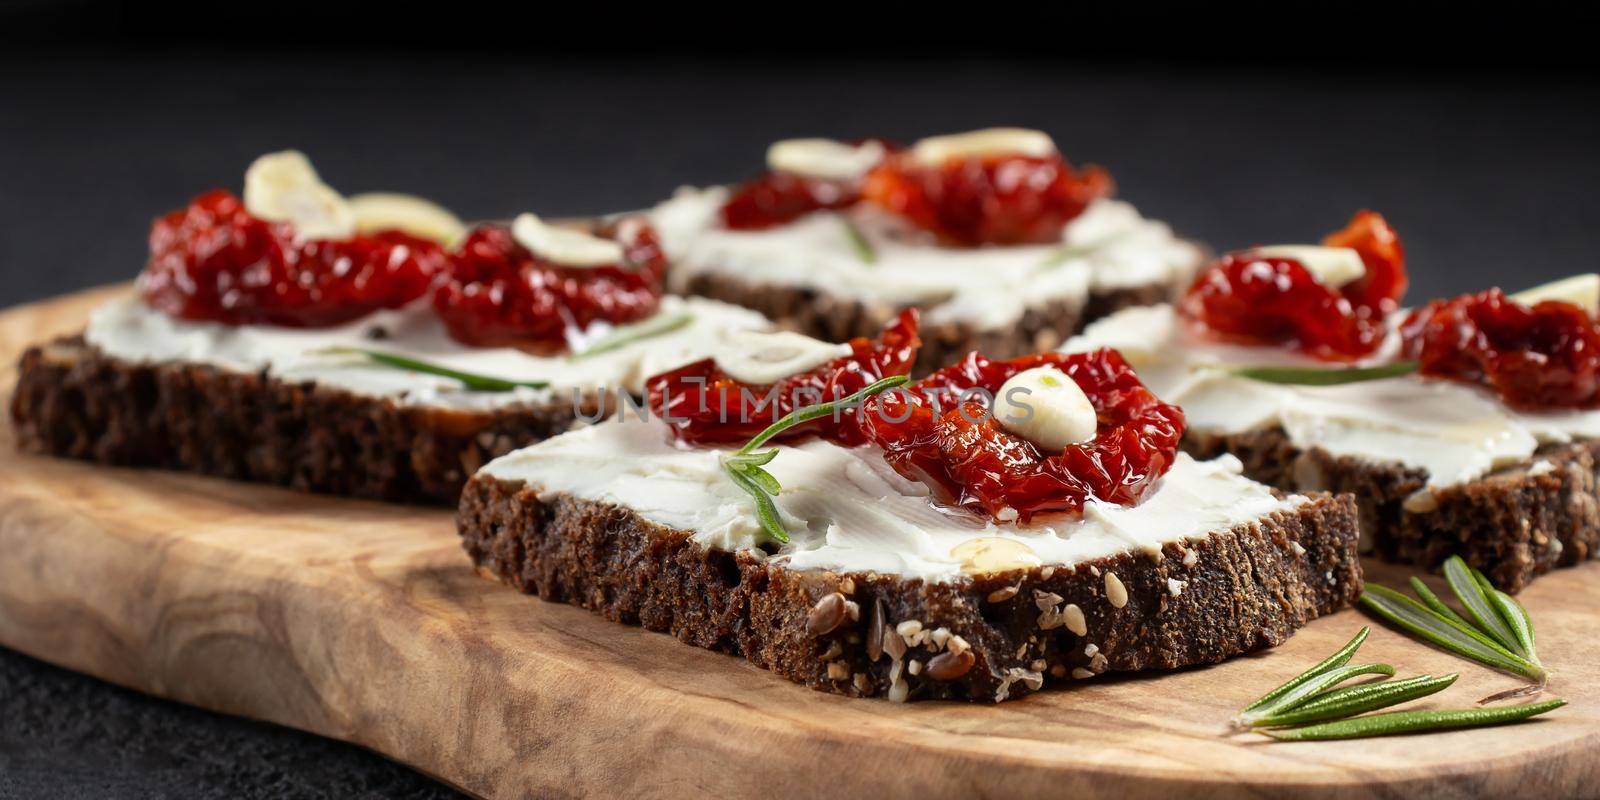 Homemade multigrain bread sandwiches with cream cheese and sun-dried tomatoes on a wooden platter. Healthy eating concept by galsand